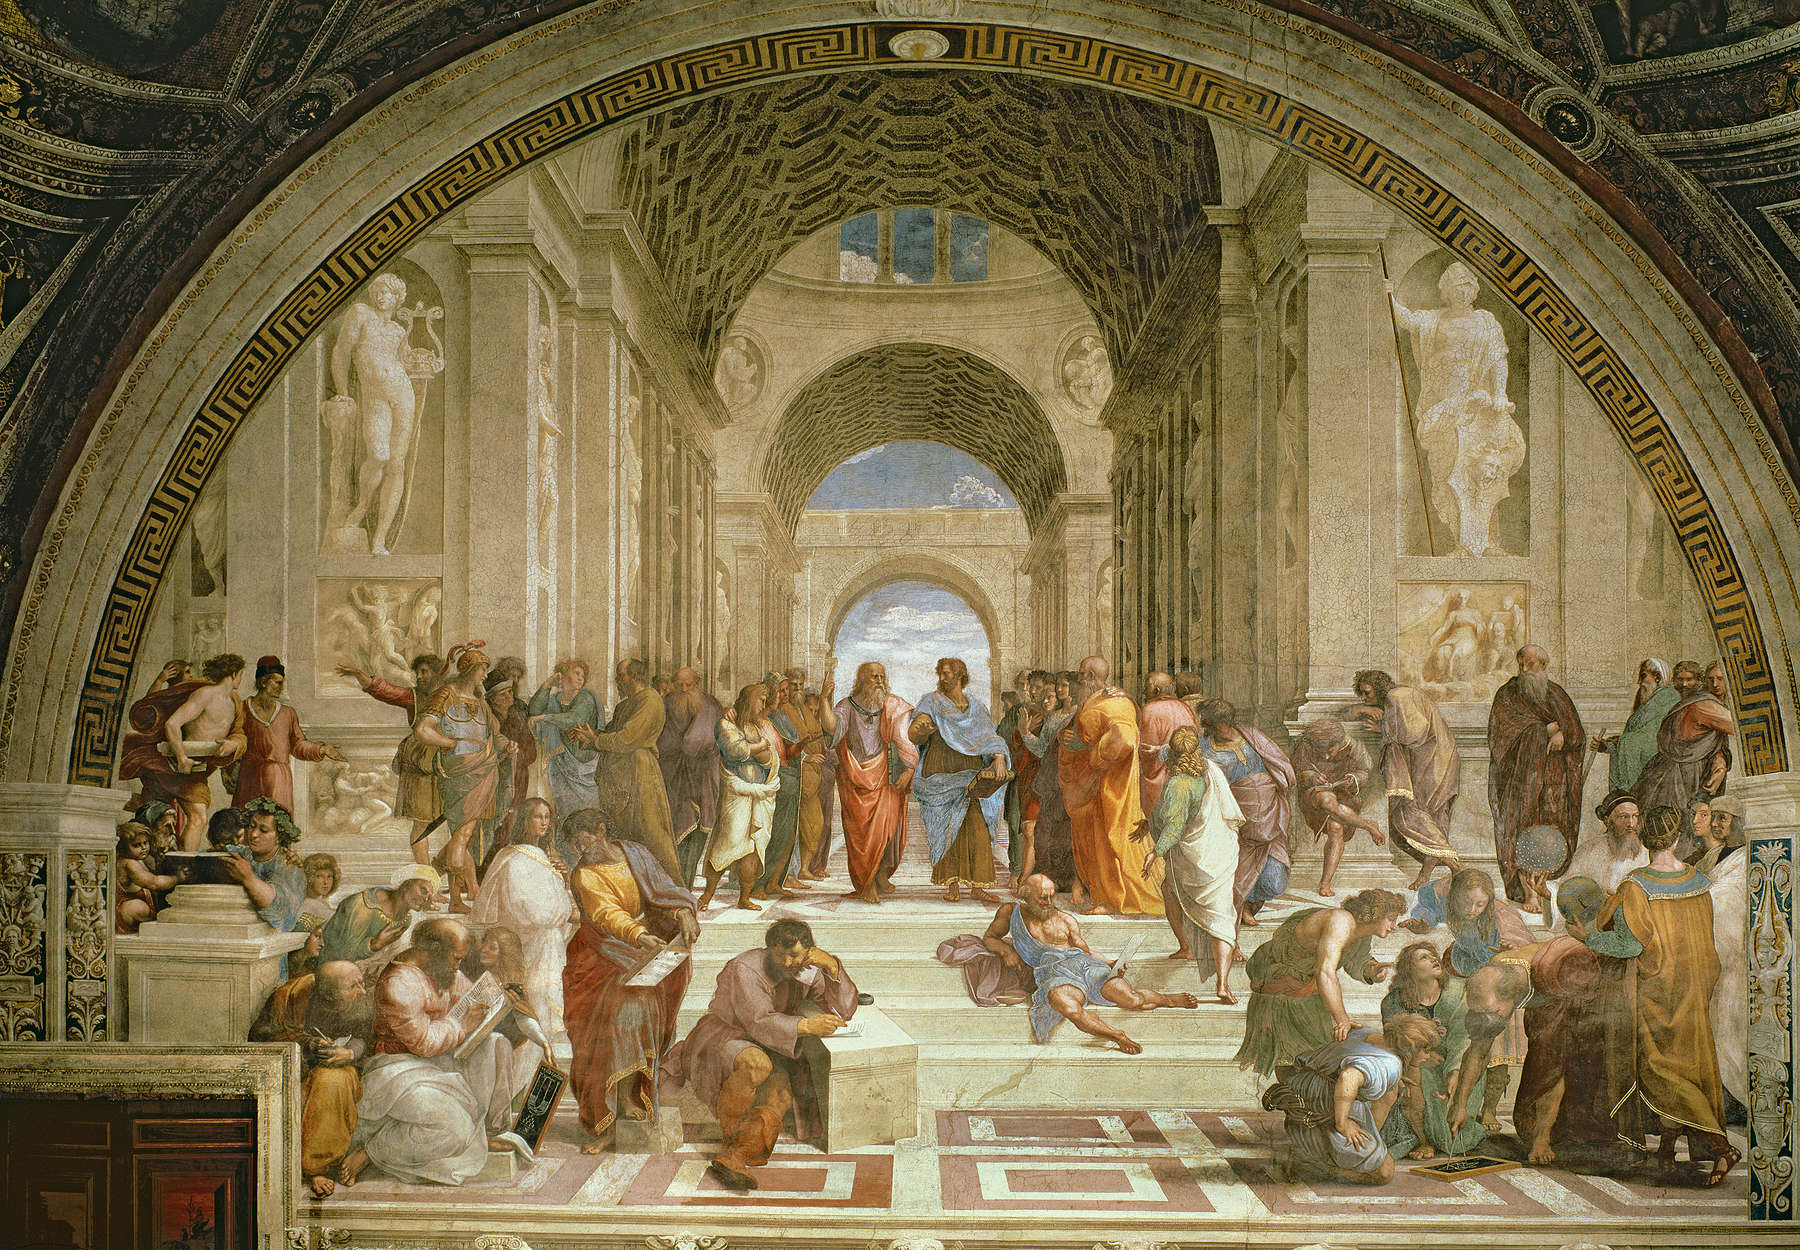             School Athens mural from Raphael
        